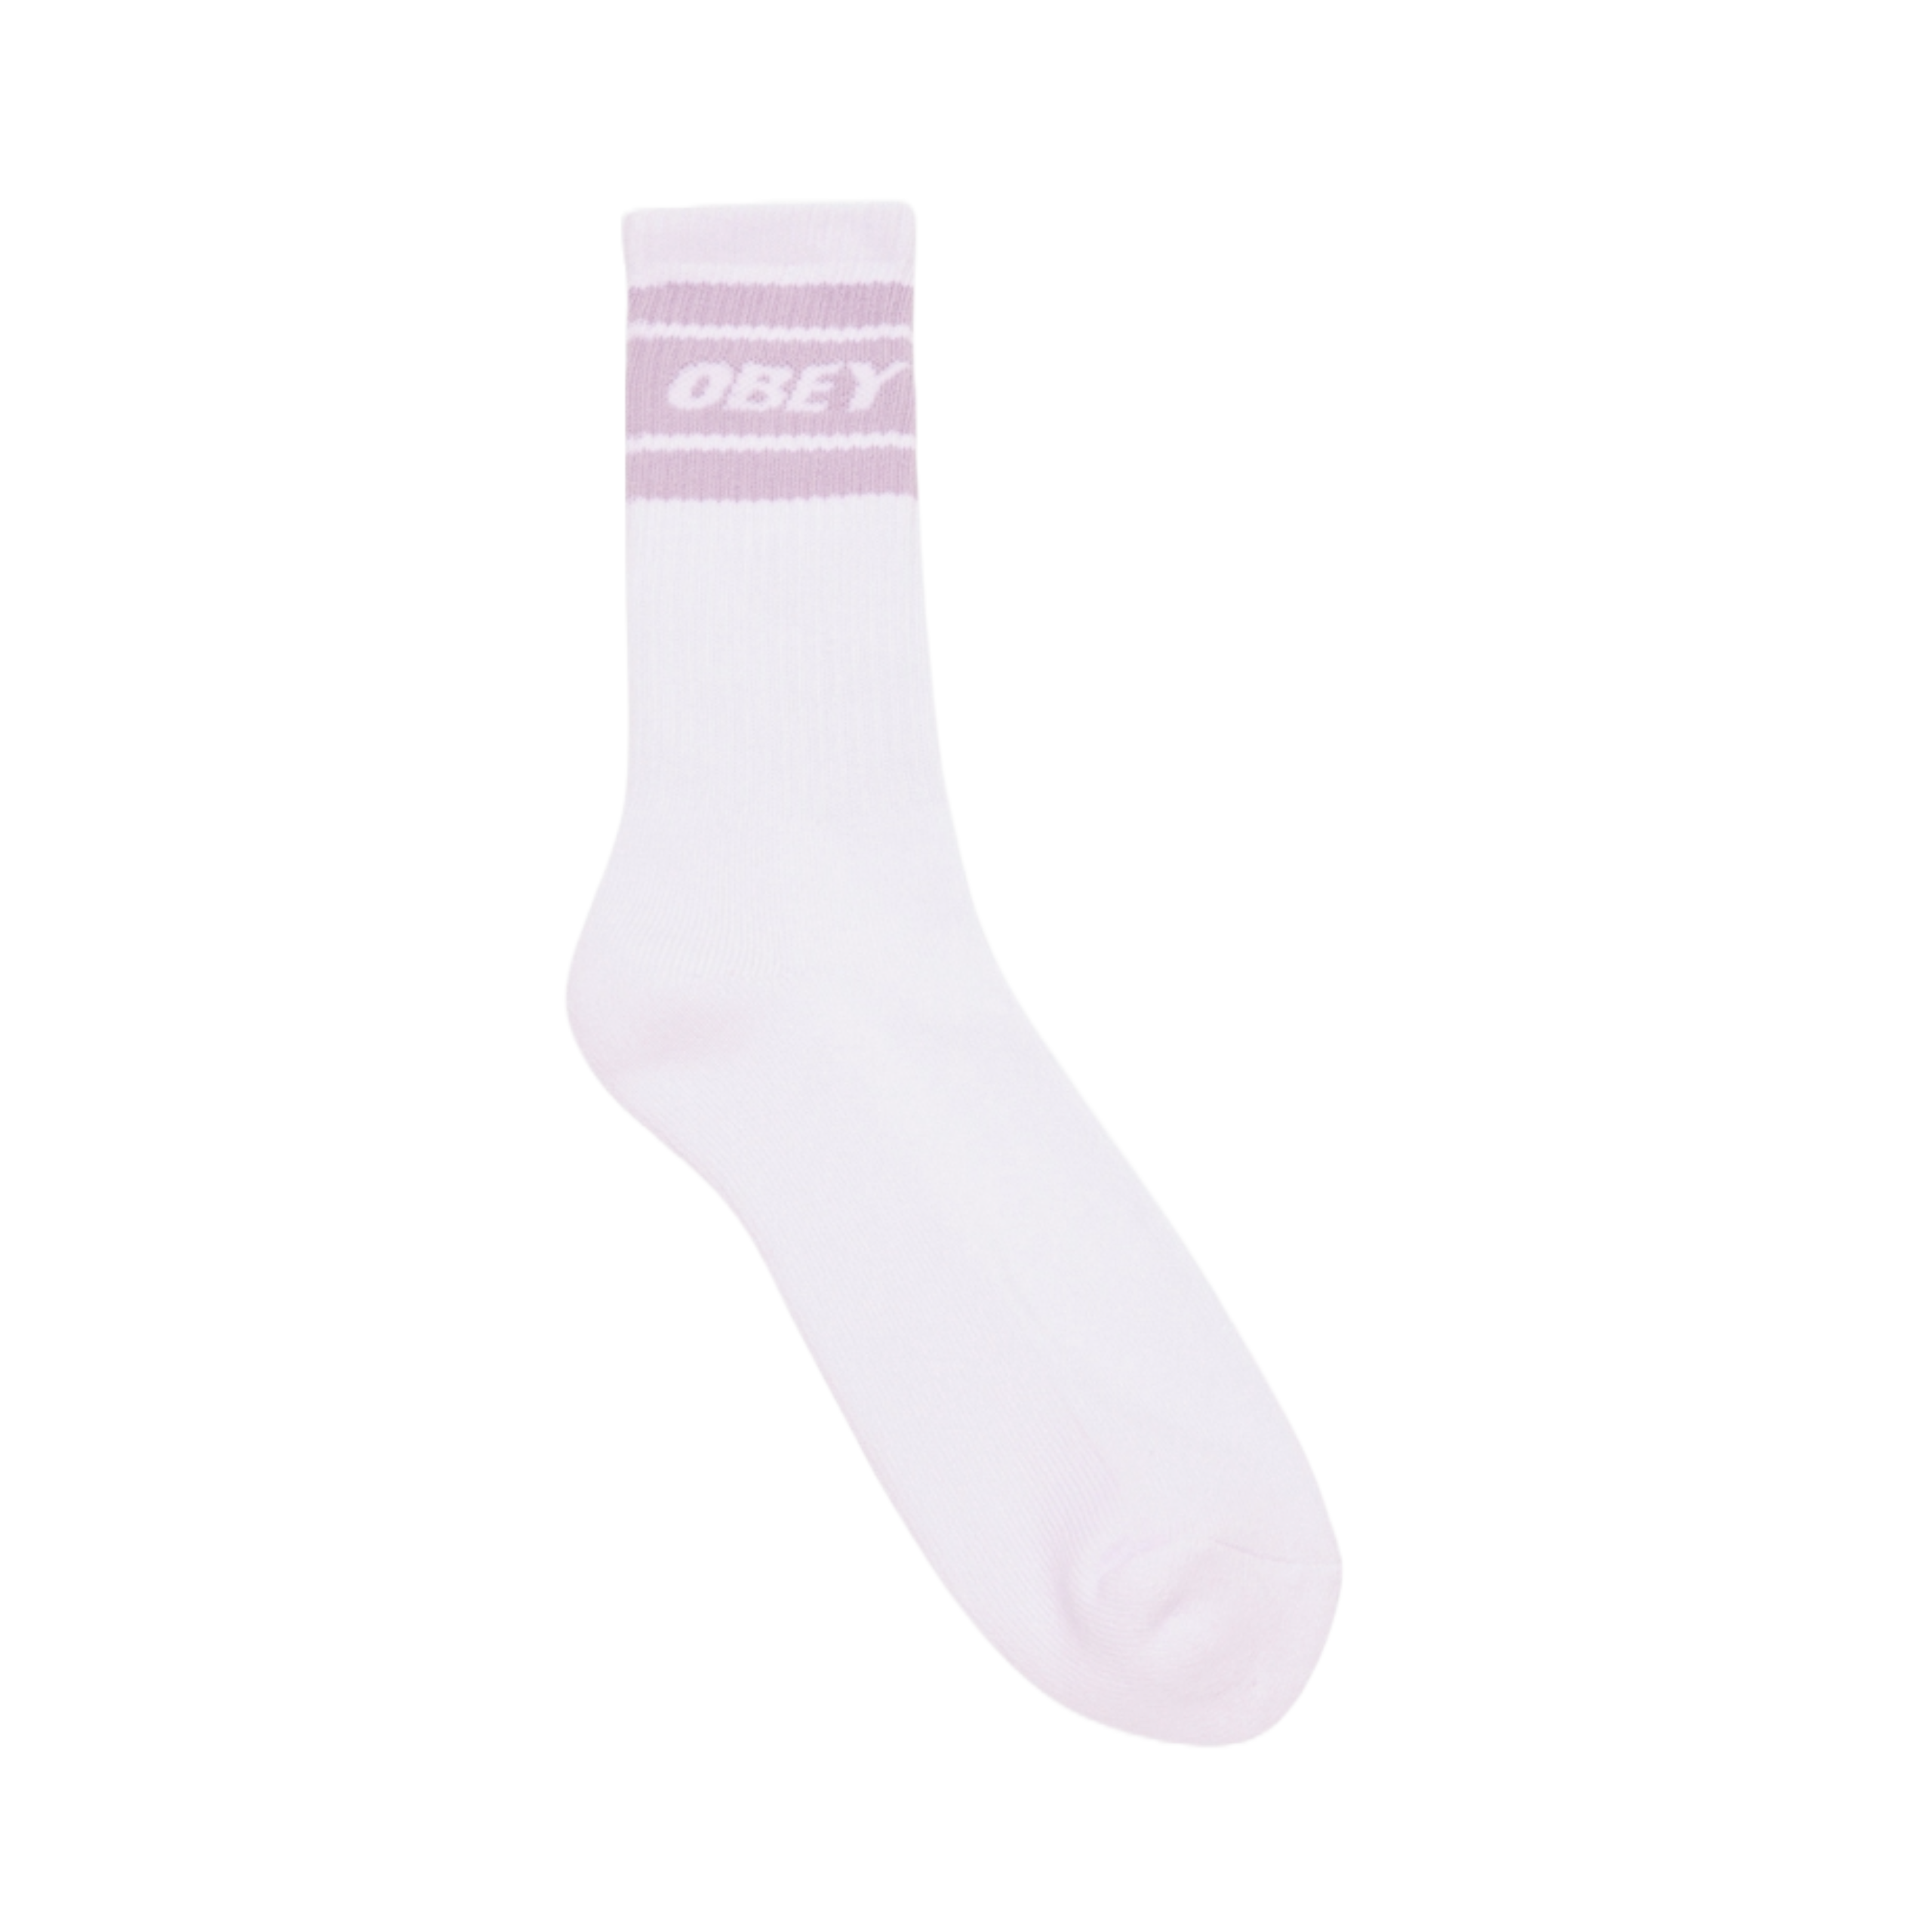 OBEY Cooper Socks - Orchid Petal / White